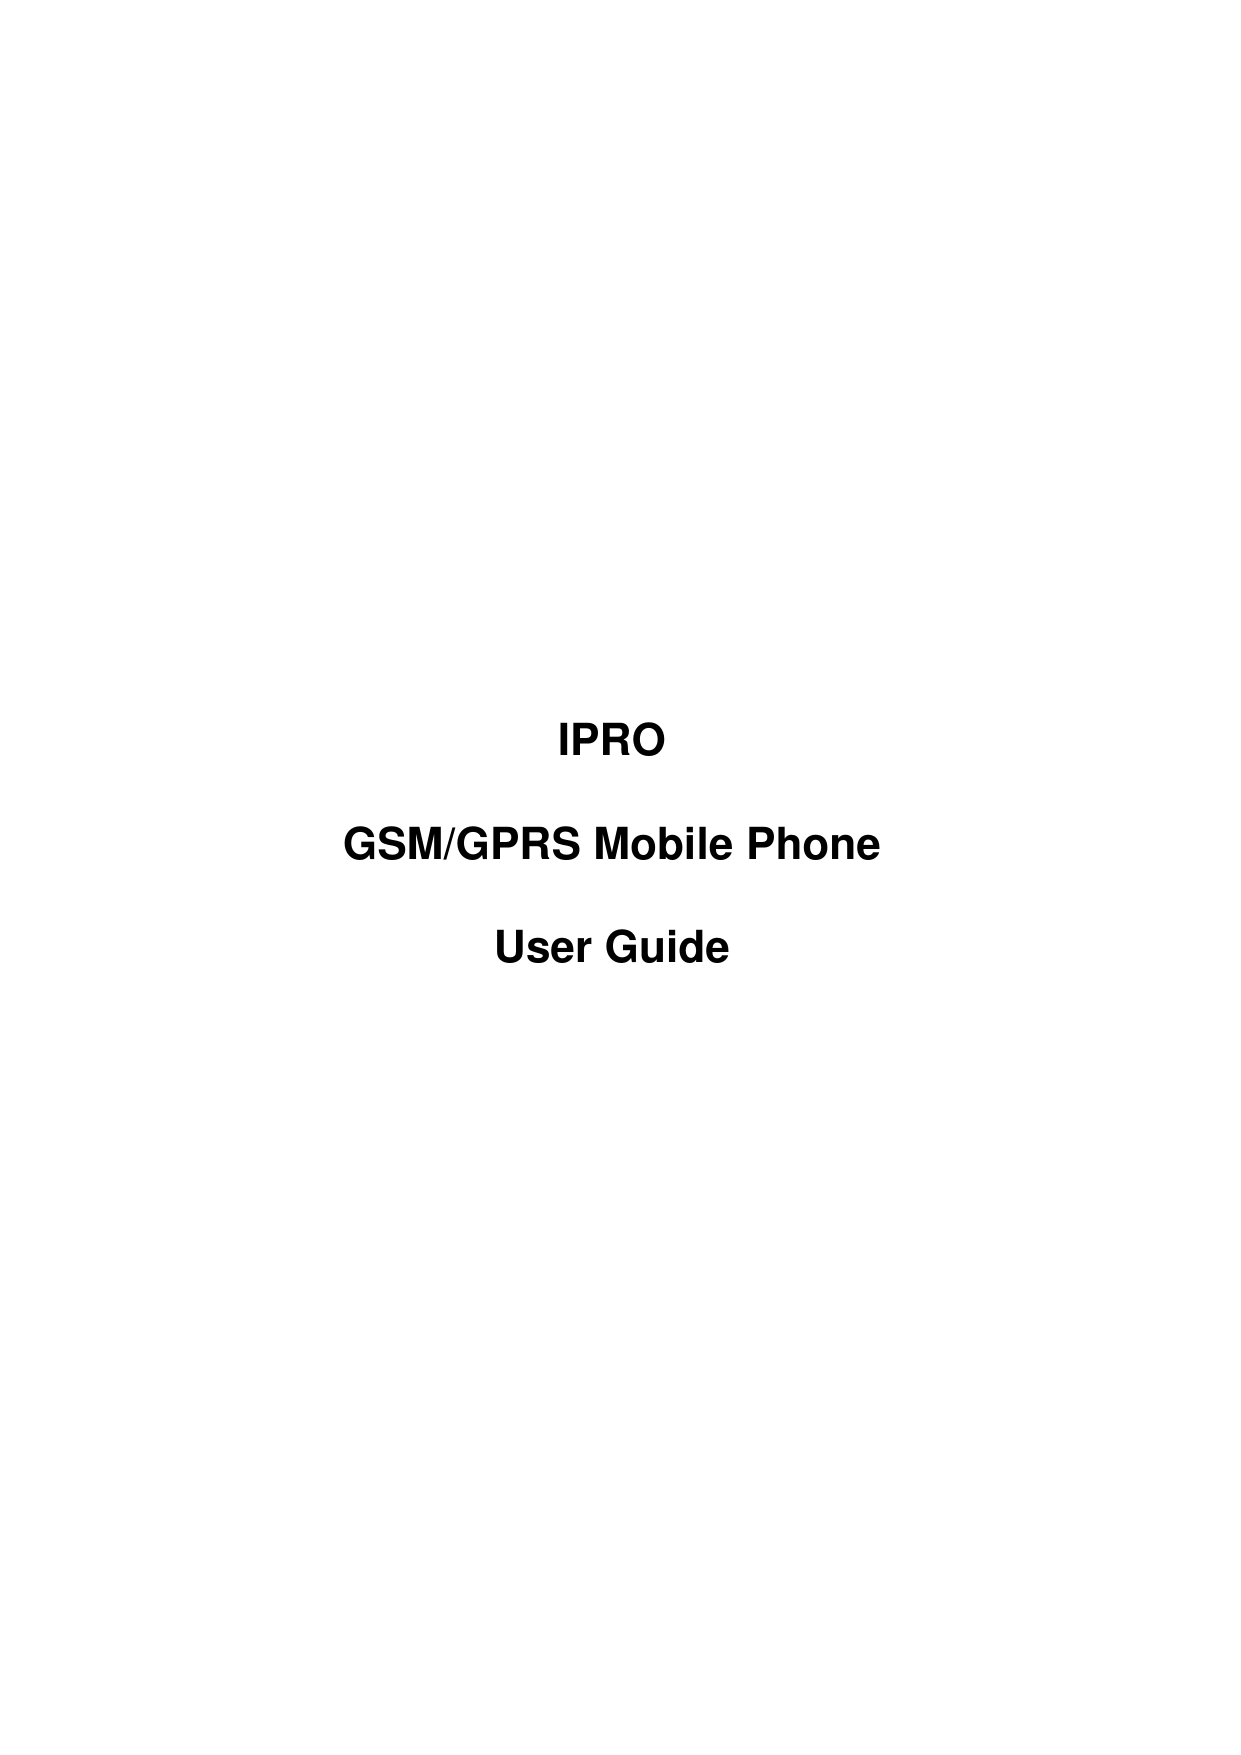          IPRO GSM/GPRS Mobile Phone User Guide 